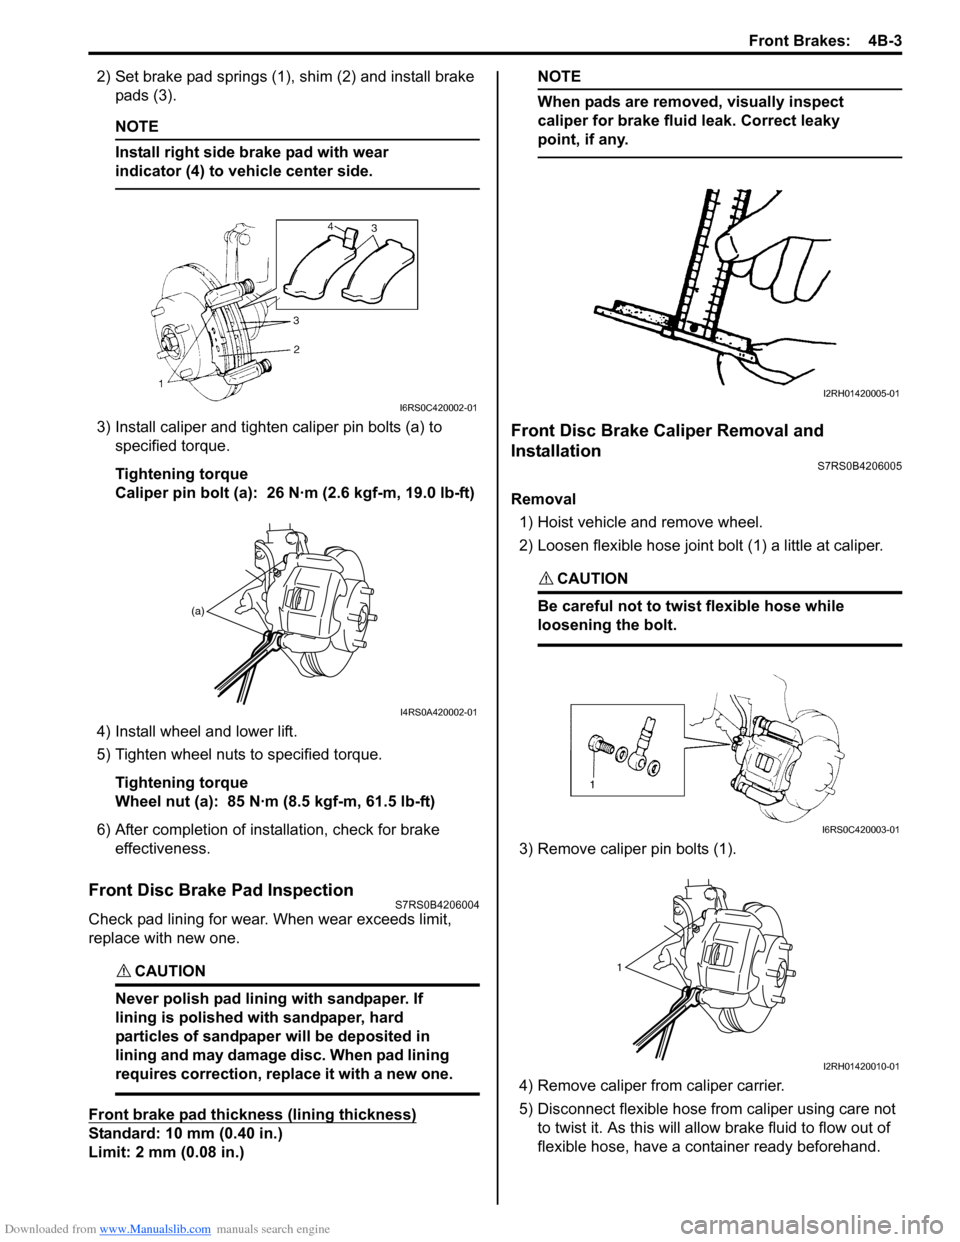 SUZUKI SWIFT 2006 2.G Service User Guide Downloaded from www.Manualslib.com manuals search engine Front Brakes:  4B-3
2) Set brake pad springs (1), shim (2) and install brake pads (3).
NOTE
Install right side brake pad with wear 
indicator (